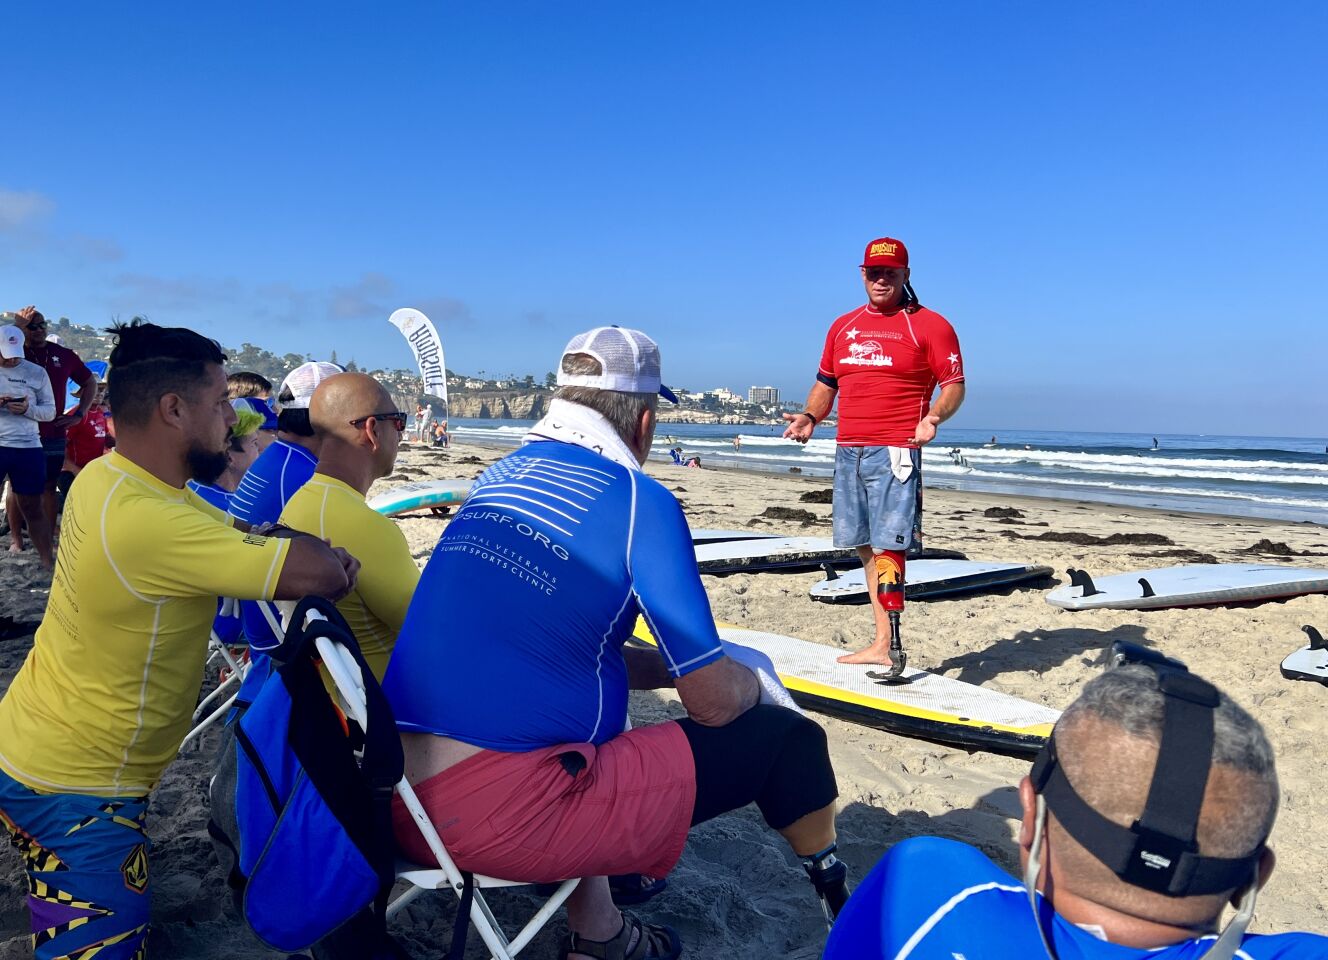 Dana Cummings of AmpSurf discusses surfing techniques with veterans during the National Veterans Summer Sports Clinic at La Jolla Shores.